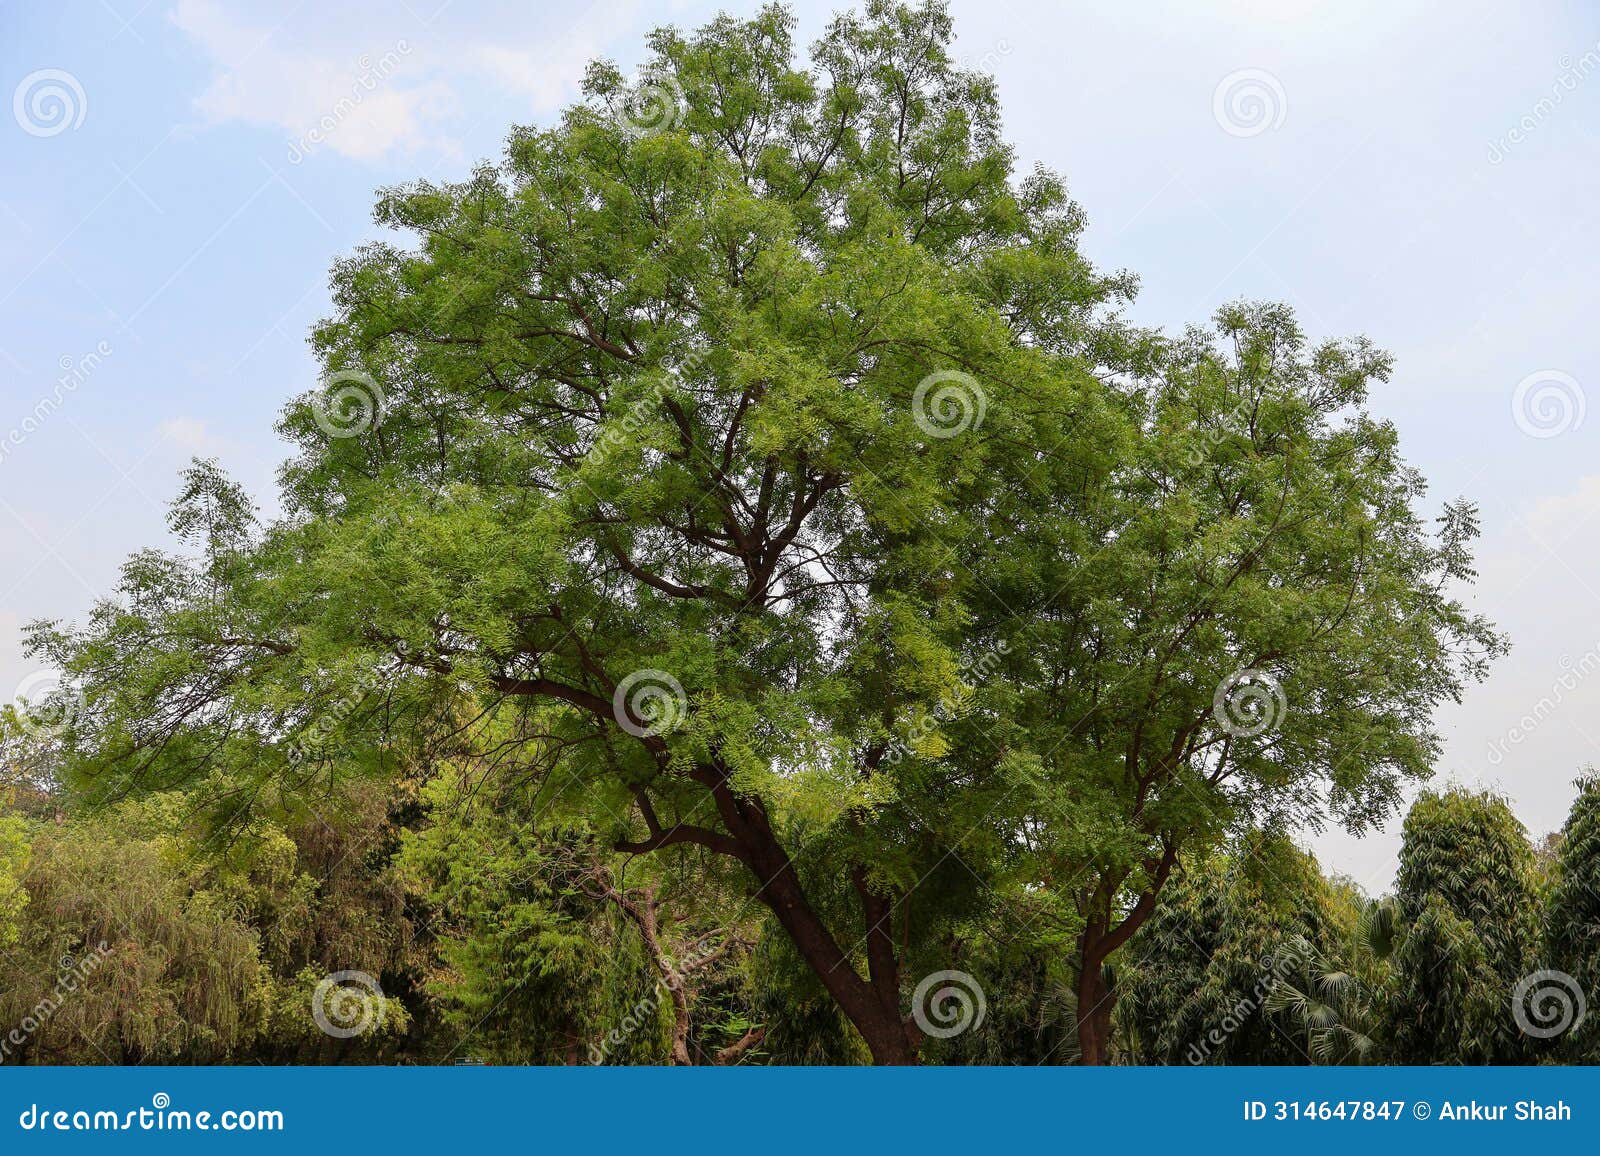 delhi zoological park, india - 13 april 2024, random picture of trees in blue sky in black and white.